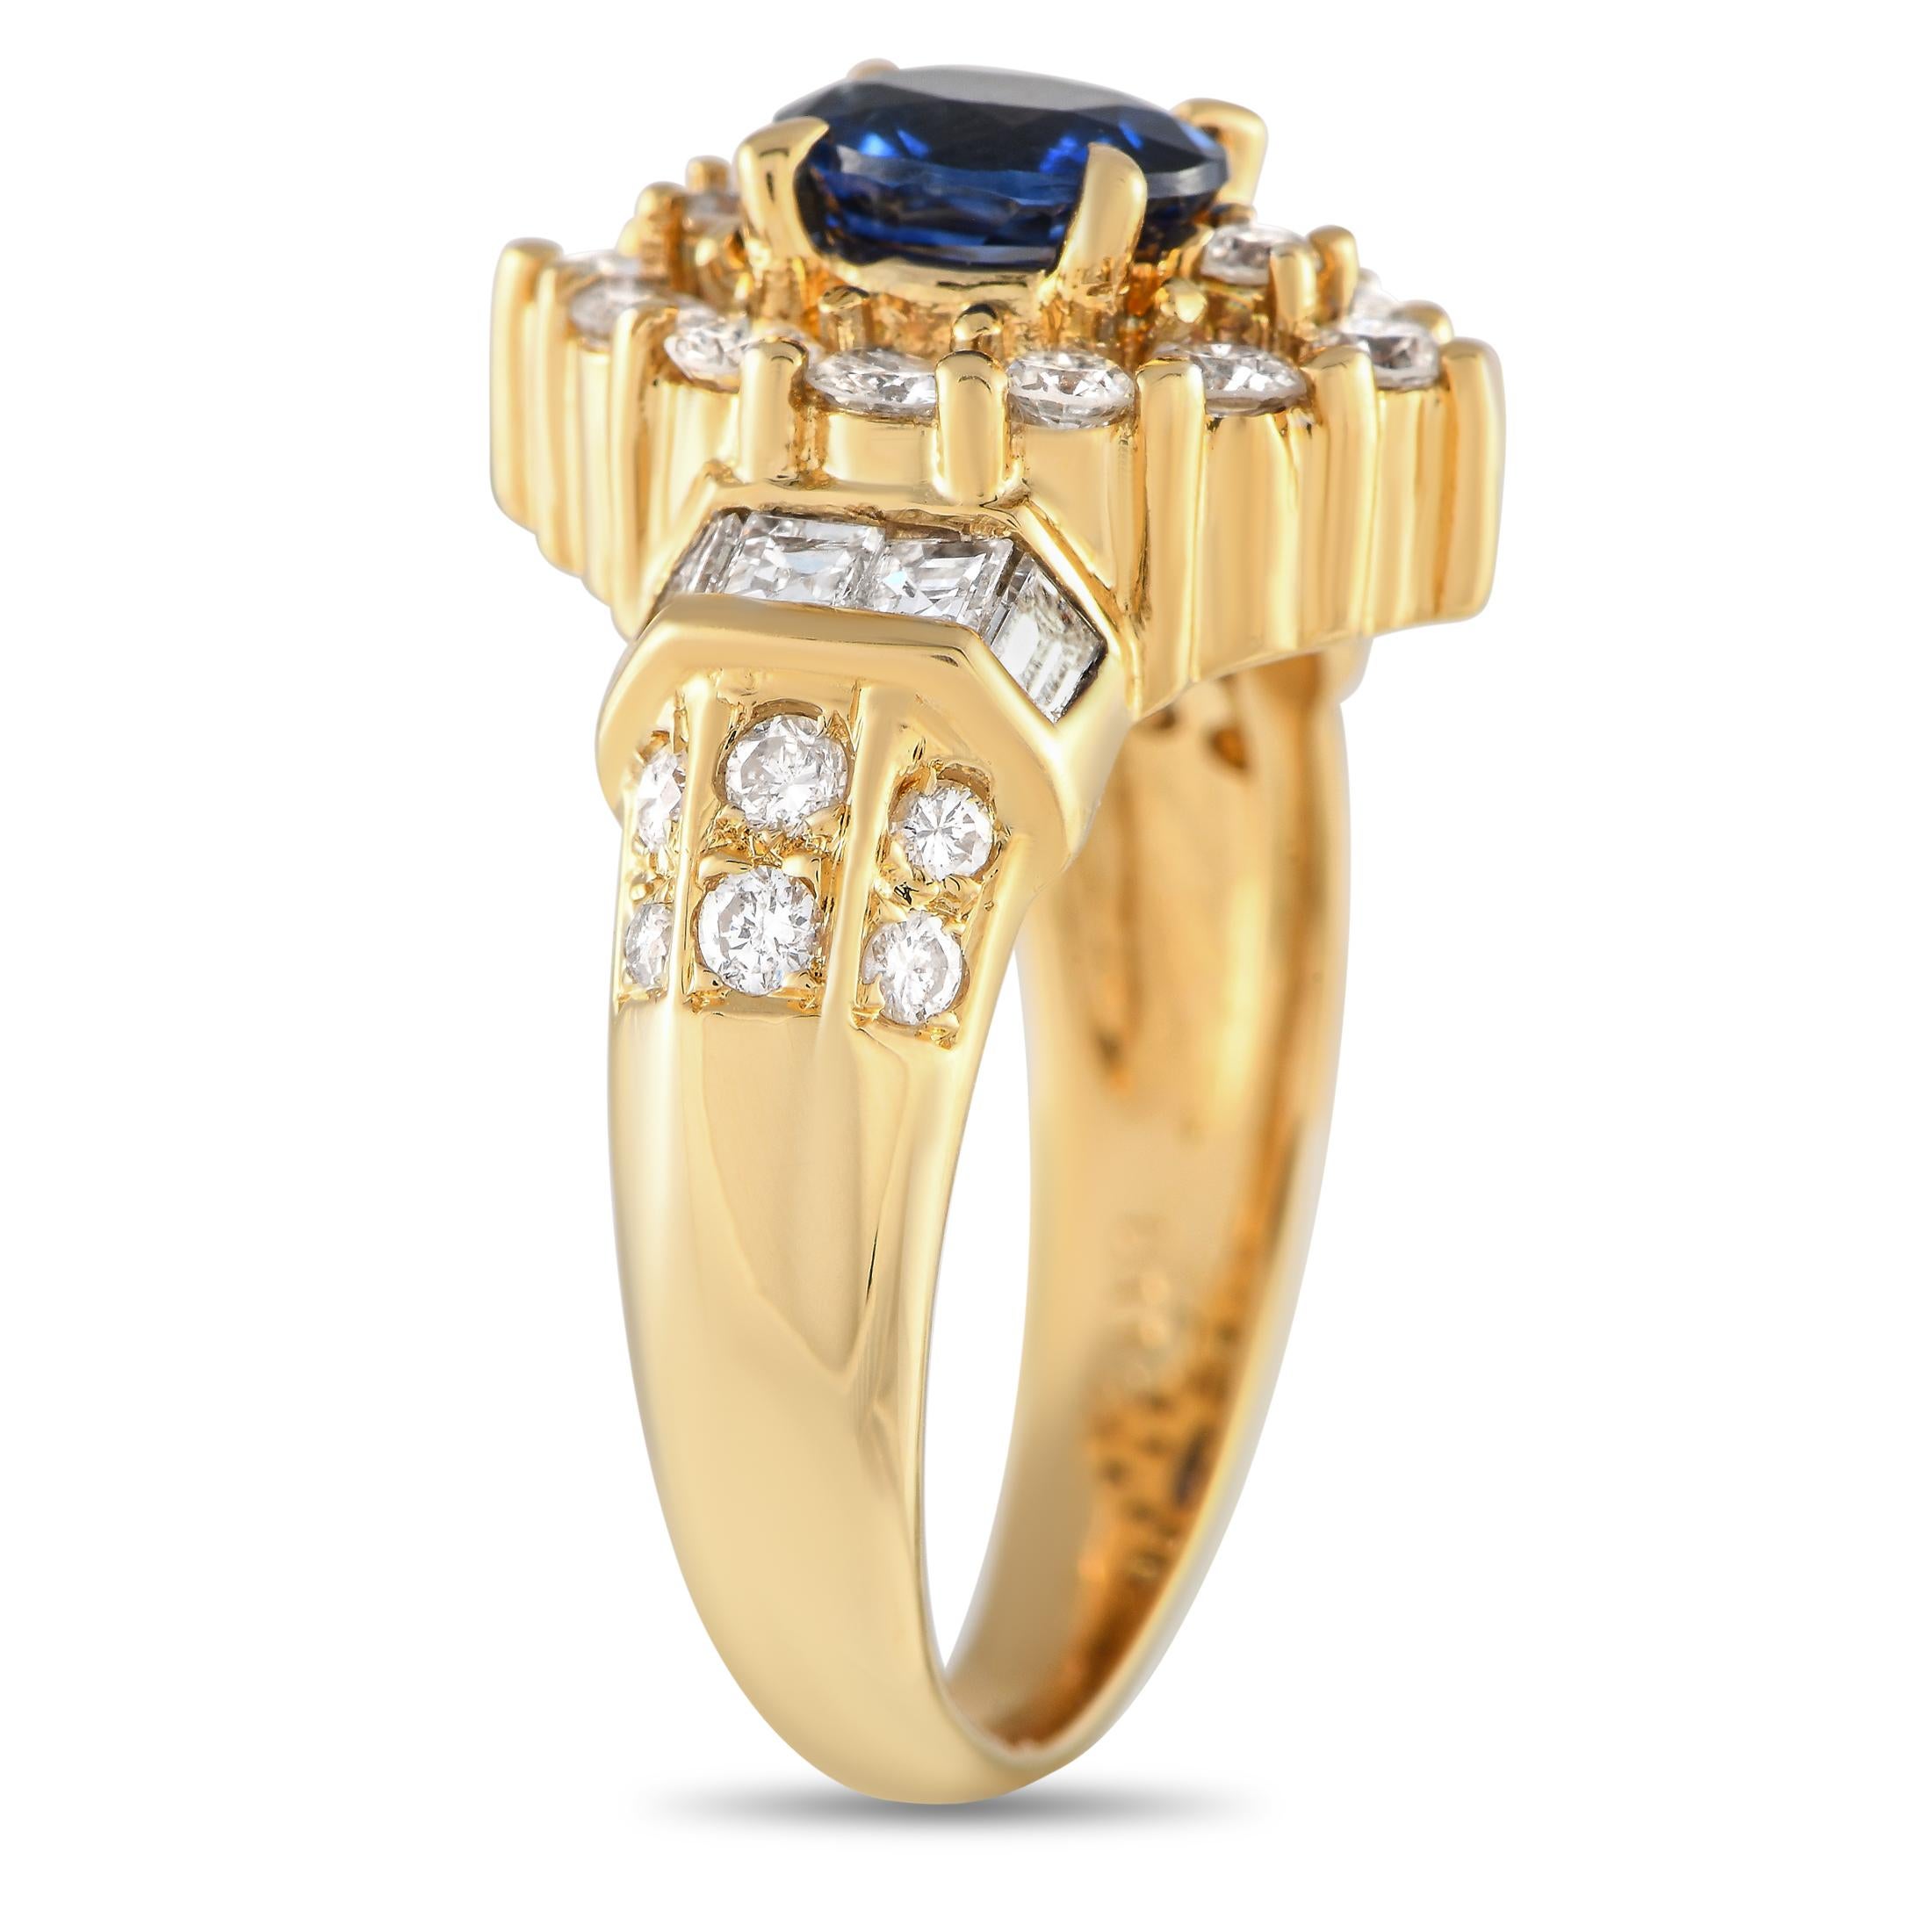 This opulent 18K Yellow Gold ring is a luxury piece that will continually make a statement. A captivating 0.97 carat Sapphire center stone is surrounded by sparkling Diamond accents totaling 1.12 carats on this impressive piece, which features a 4mm